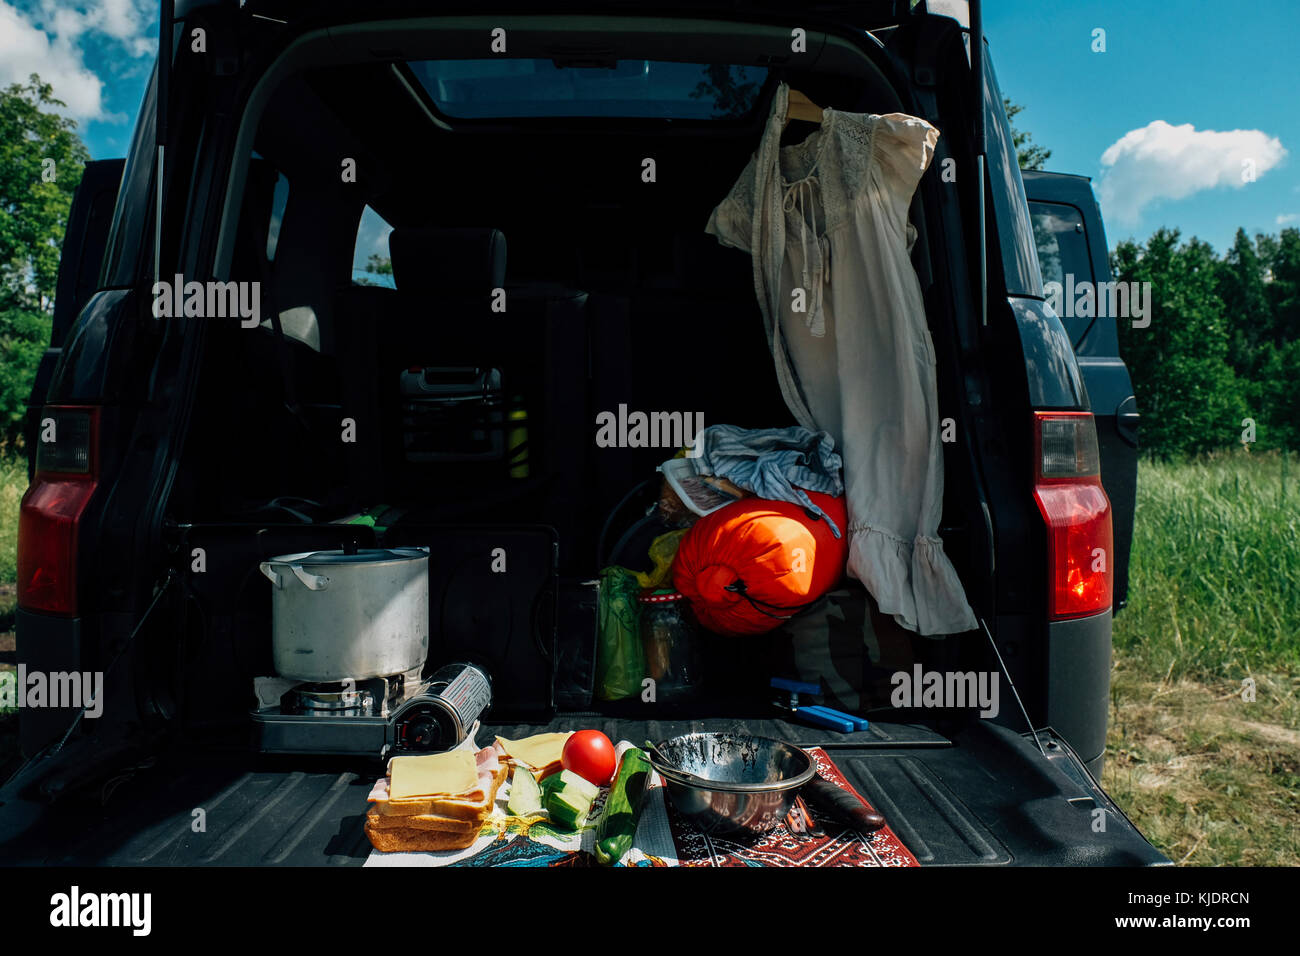 Food and camping gear in car Stock Photo